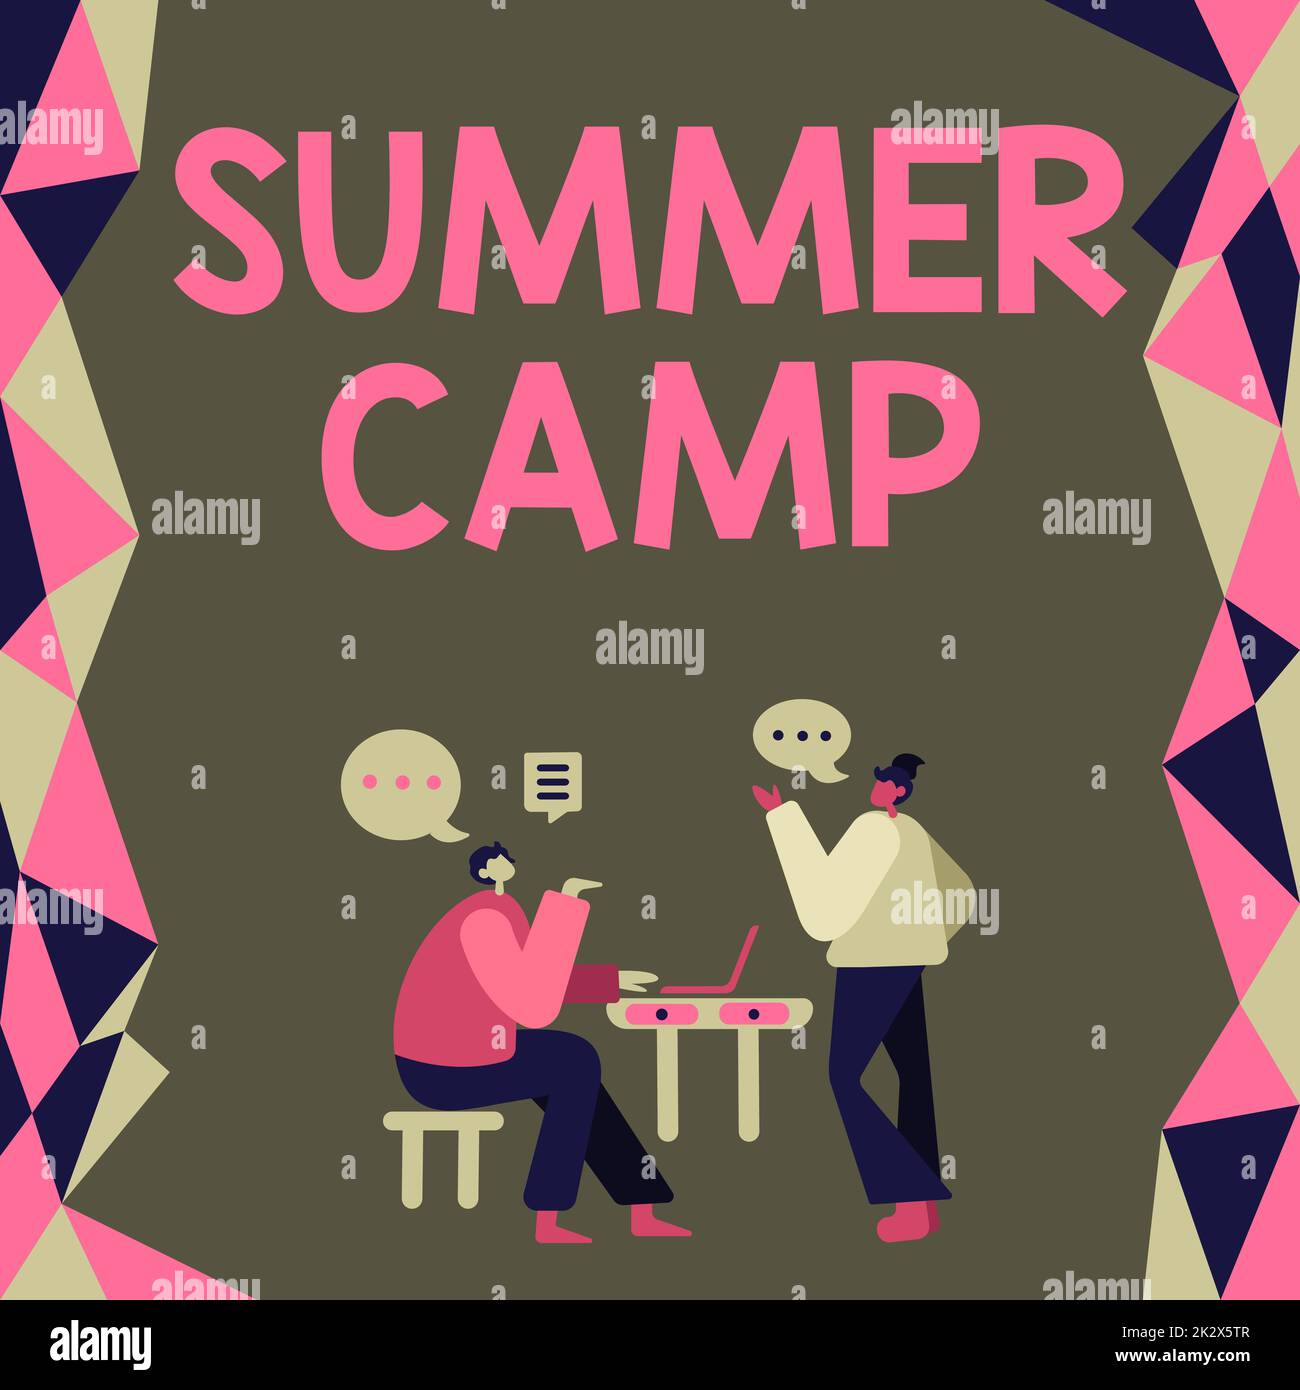 Text caption presenting Summer Camp. Business showcase Supervised program for kids and teenagers during summertime. Colleagues Having Meeting Discussing Future Project Improvement Ideas. Stock Photo